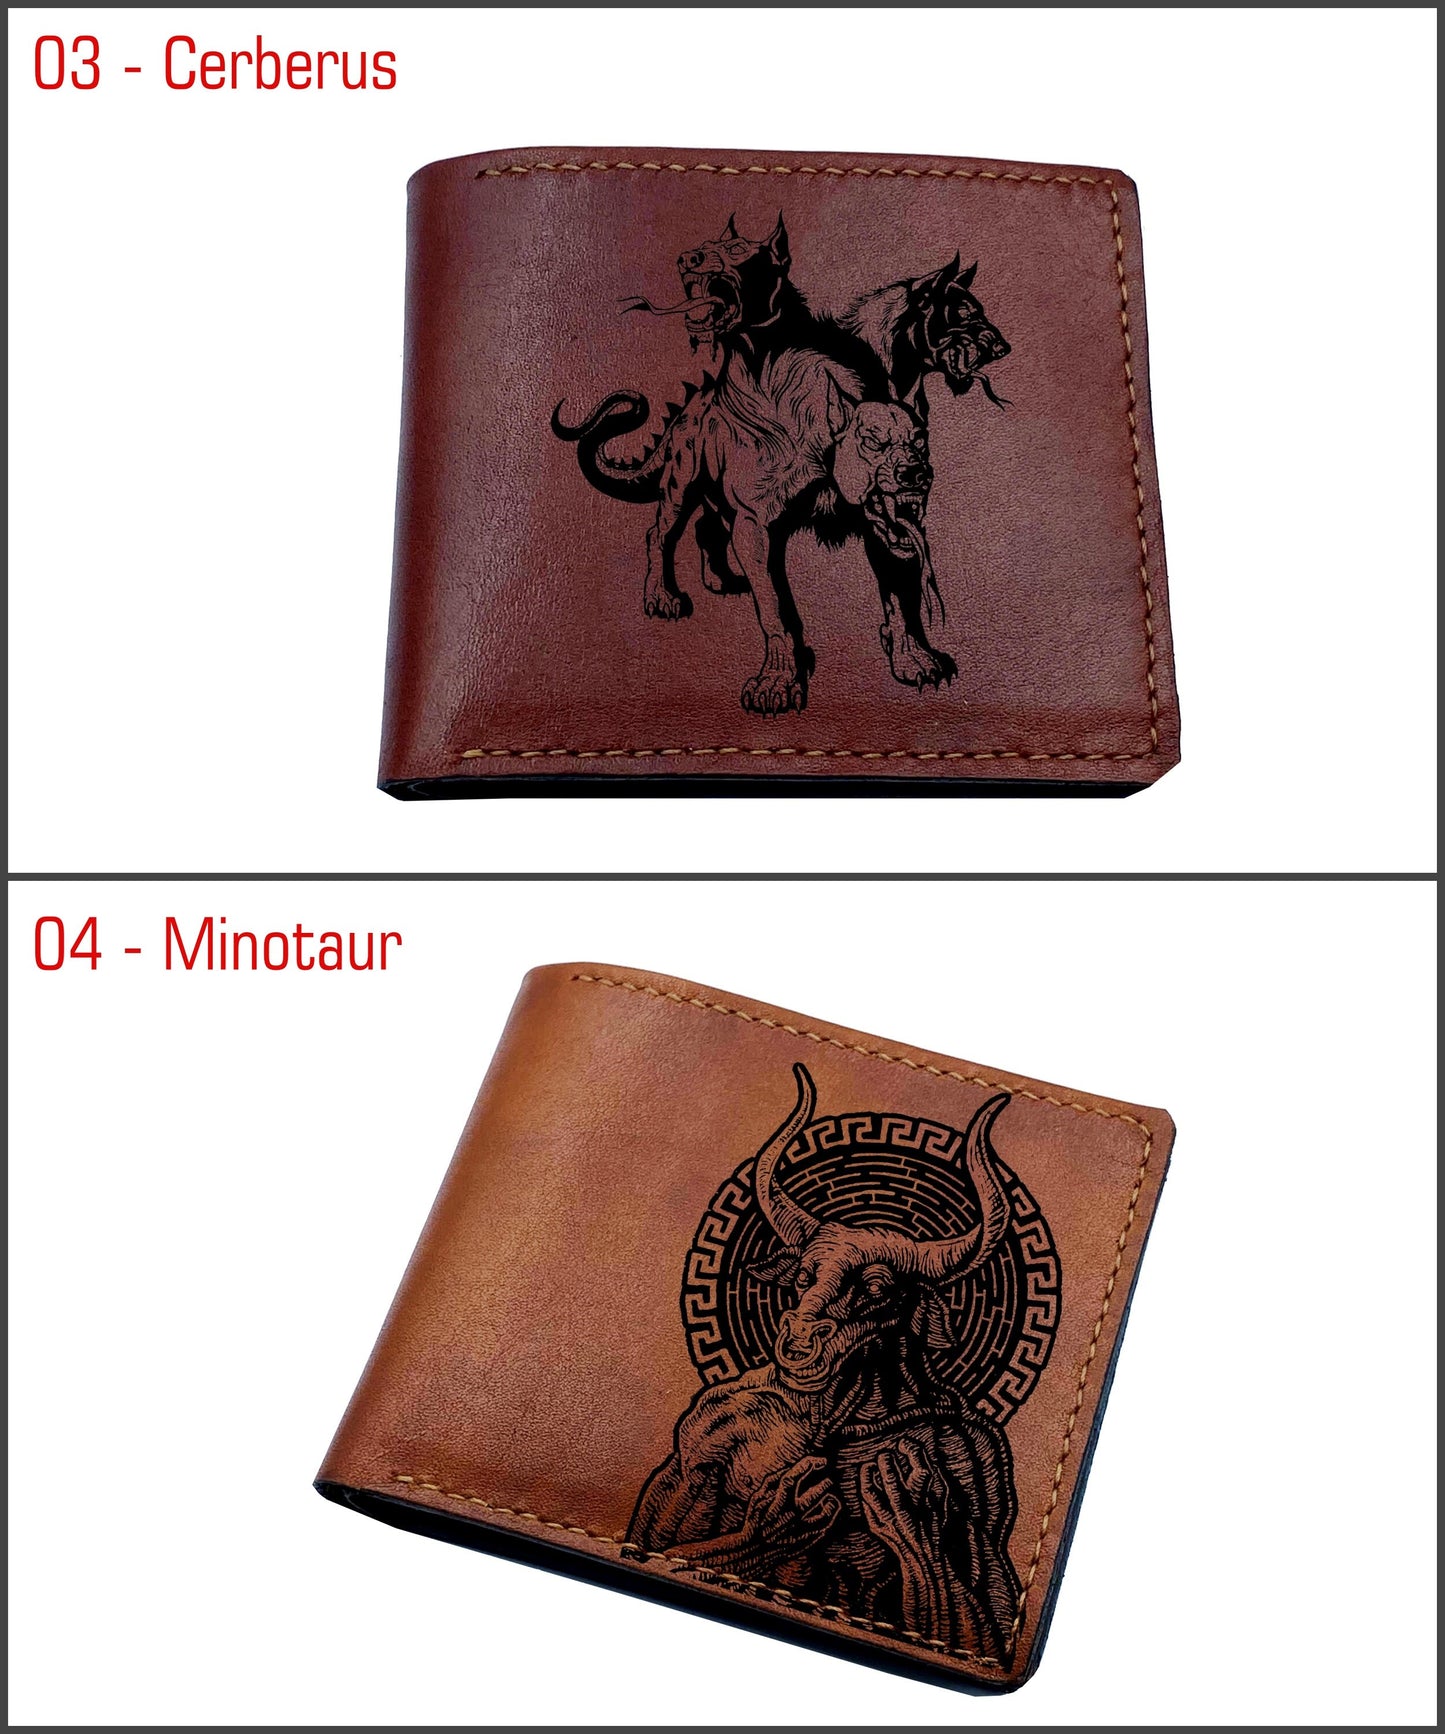 Minotaur leather men's wallet, monster engraved leather gift for men, customized present for dad, leather anniversary gift for husband